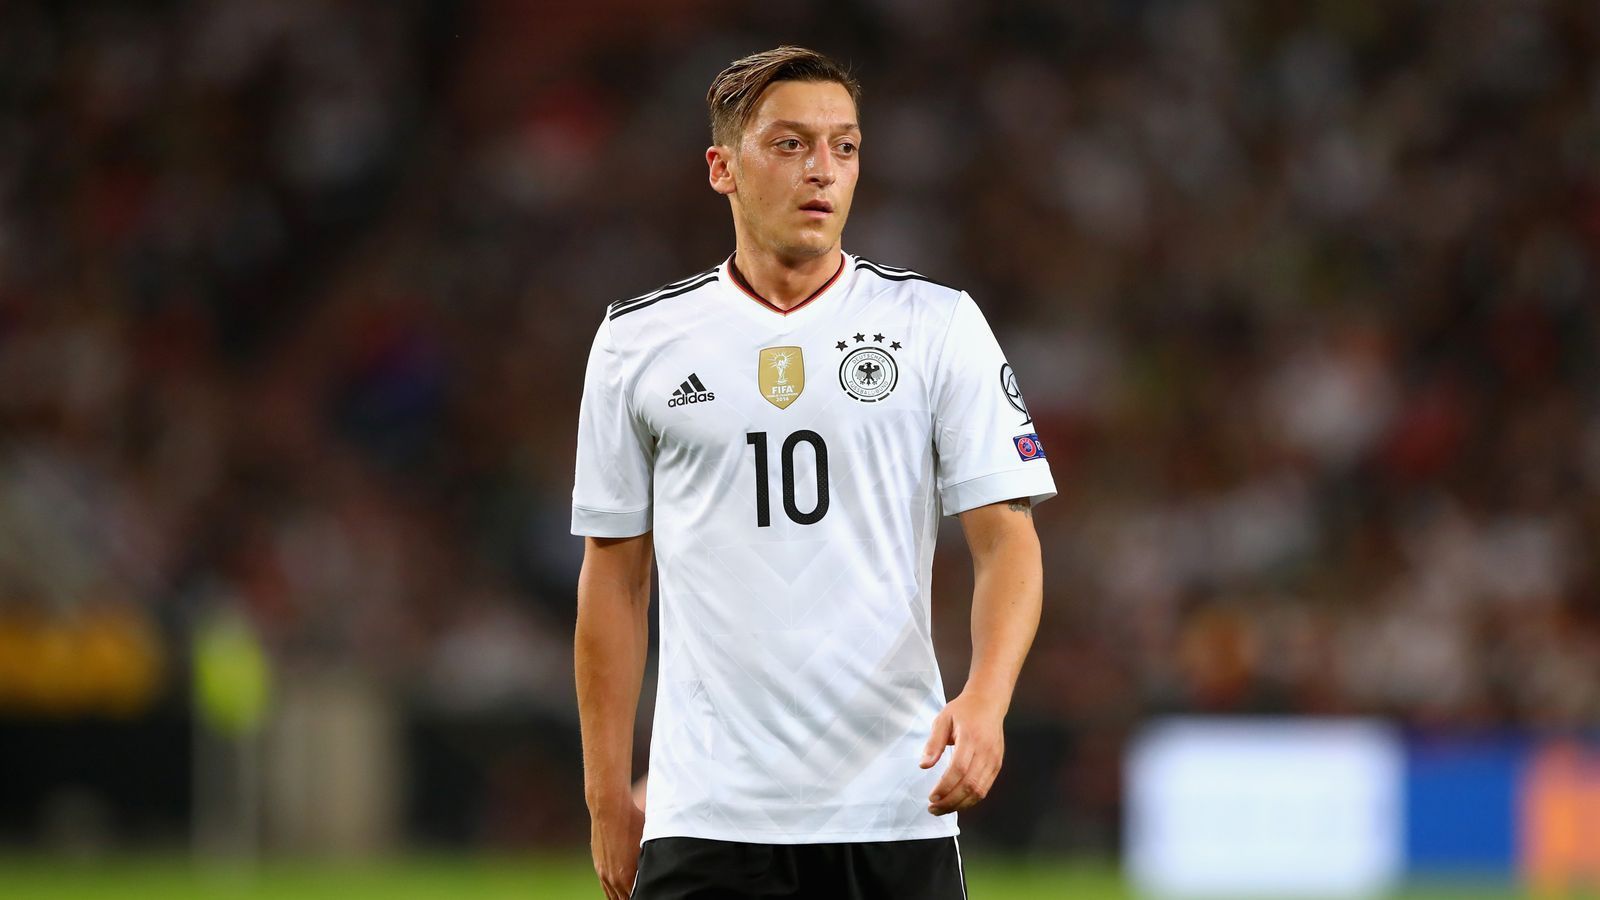 Mesut Ozil in action for Germany during a game.